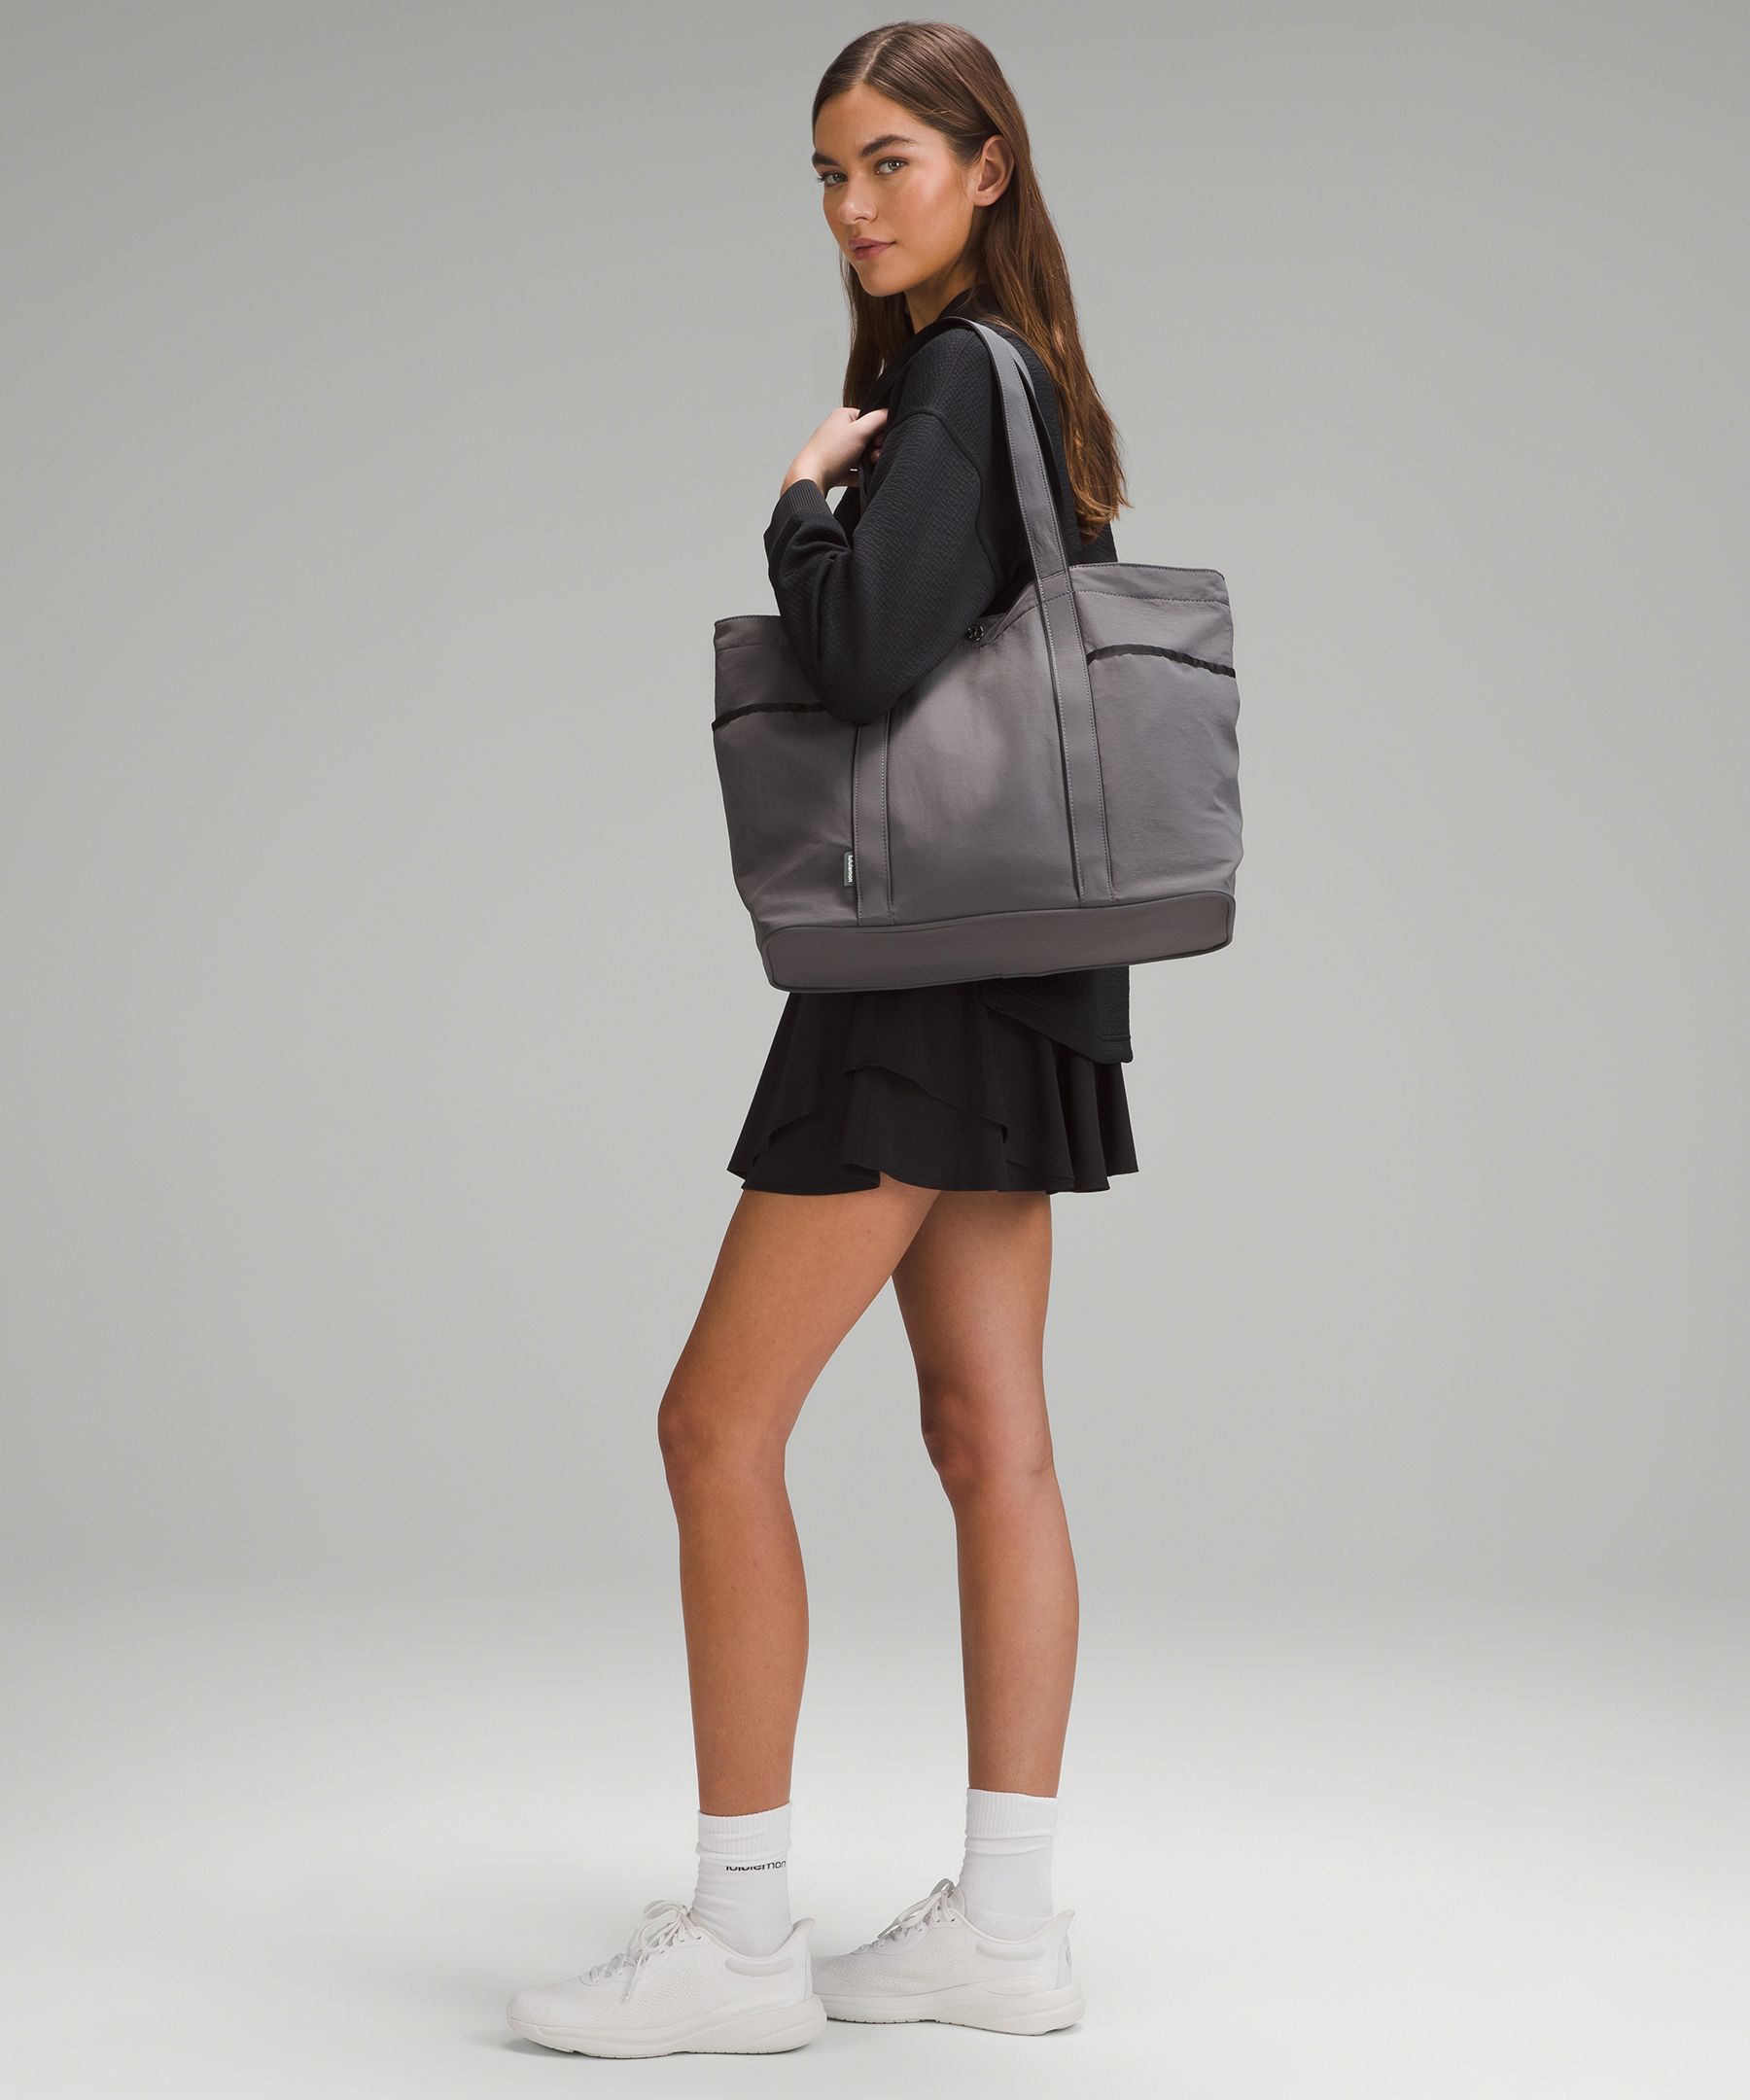 Lululemon Yoga Bag: Lightweight Style and Ultimate Convenience